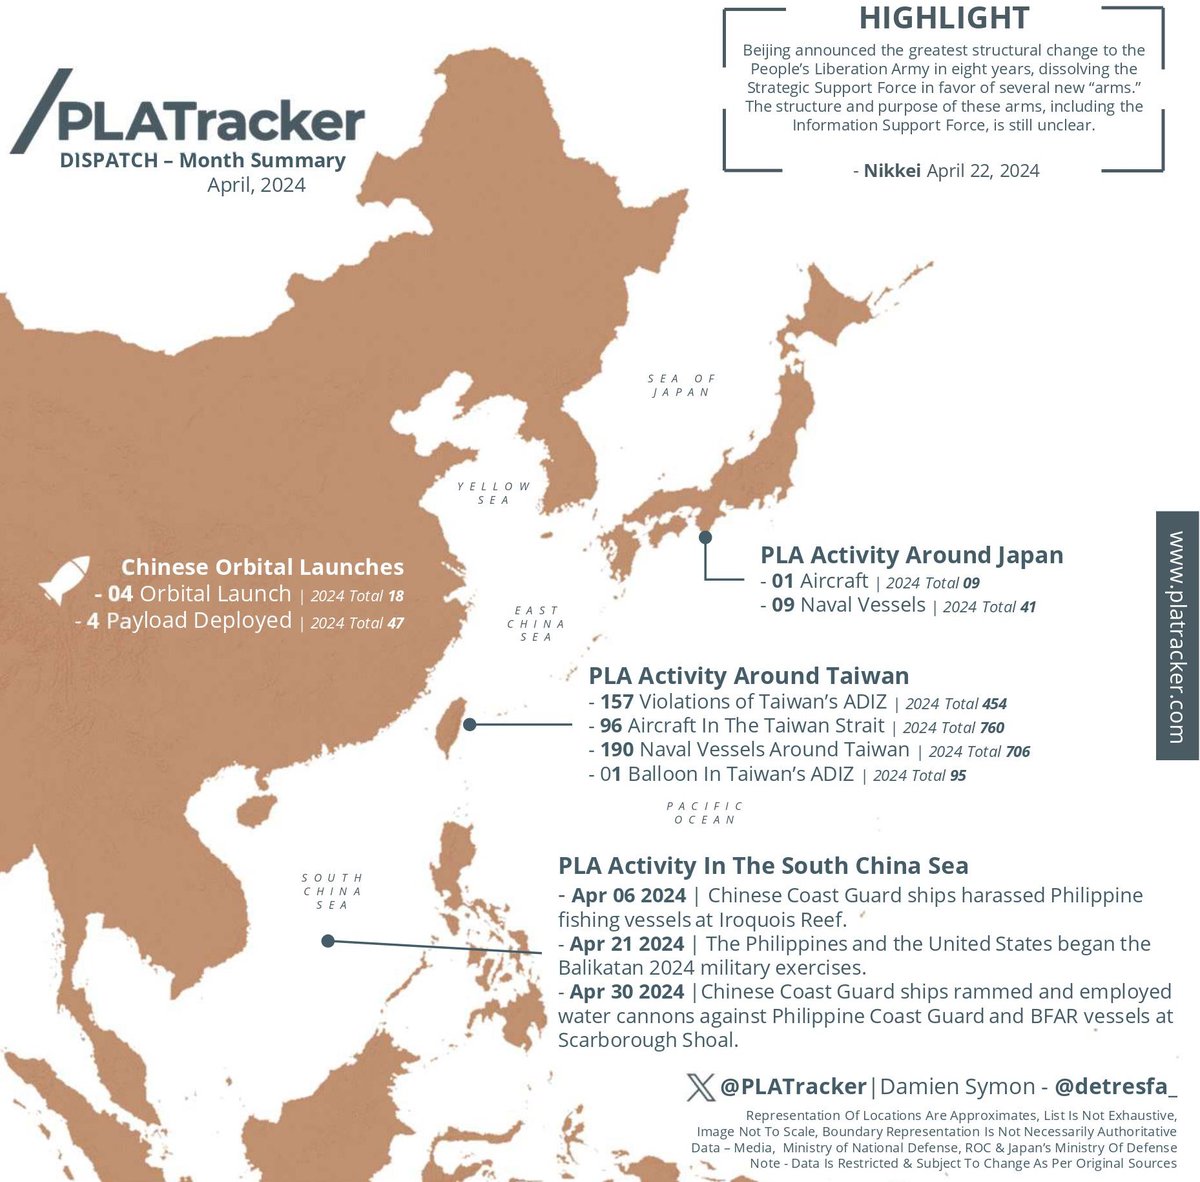 PLATracker DISPATCH - Here is our month-end summary with @detresfa_ where we track aggressive encounters in the South China Sea, increased PLA air activity around Taiwan & more through April 2024: